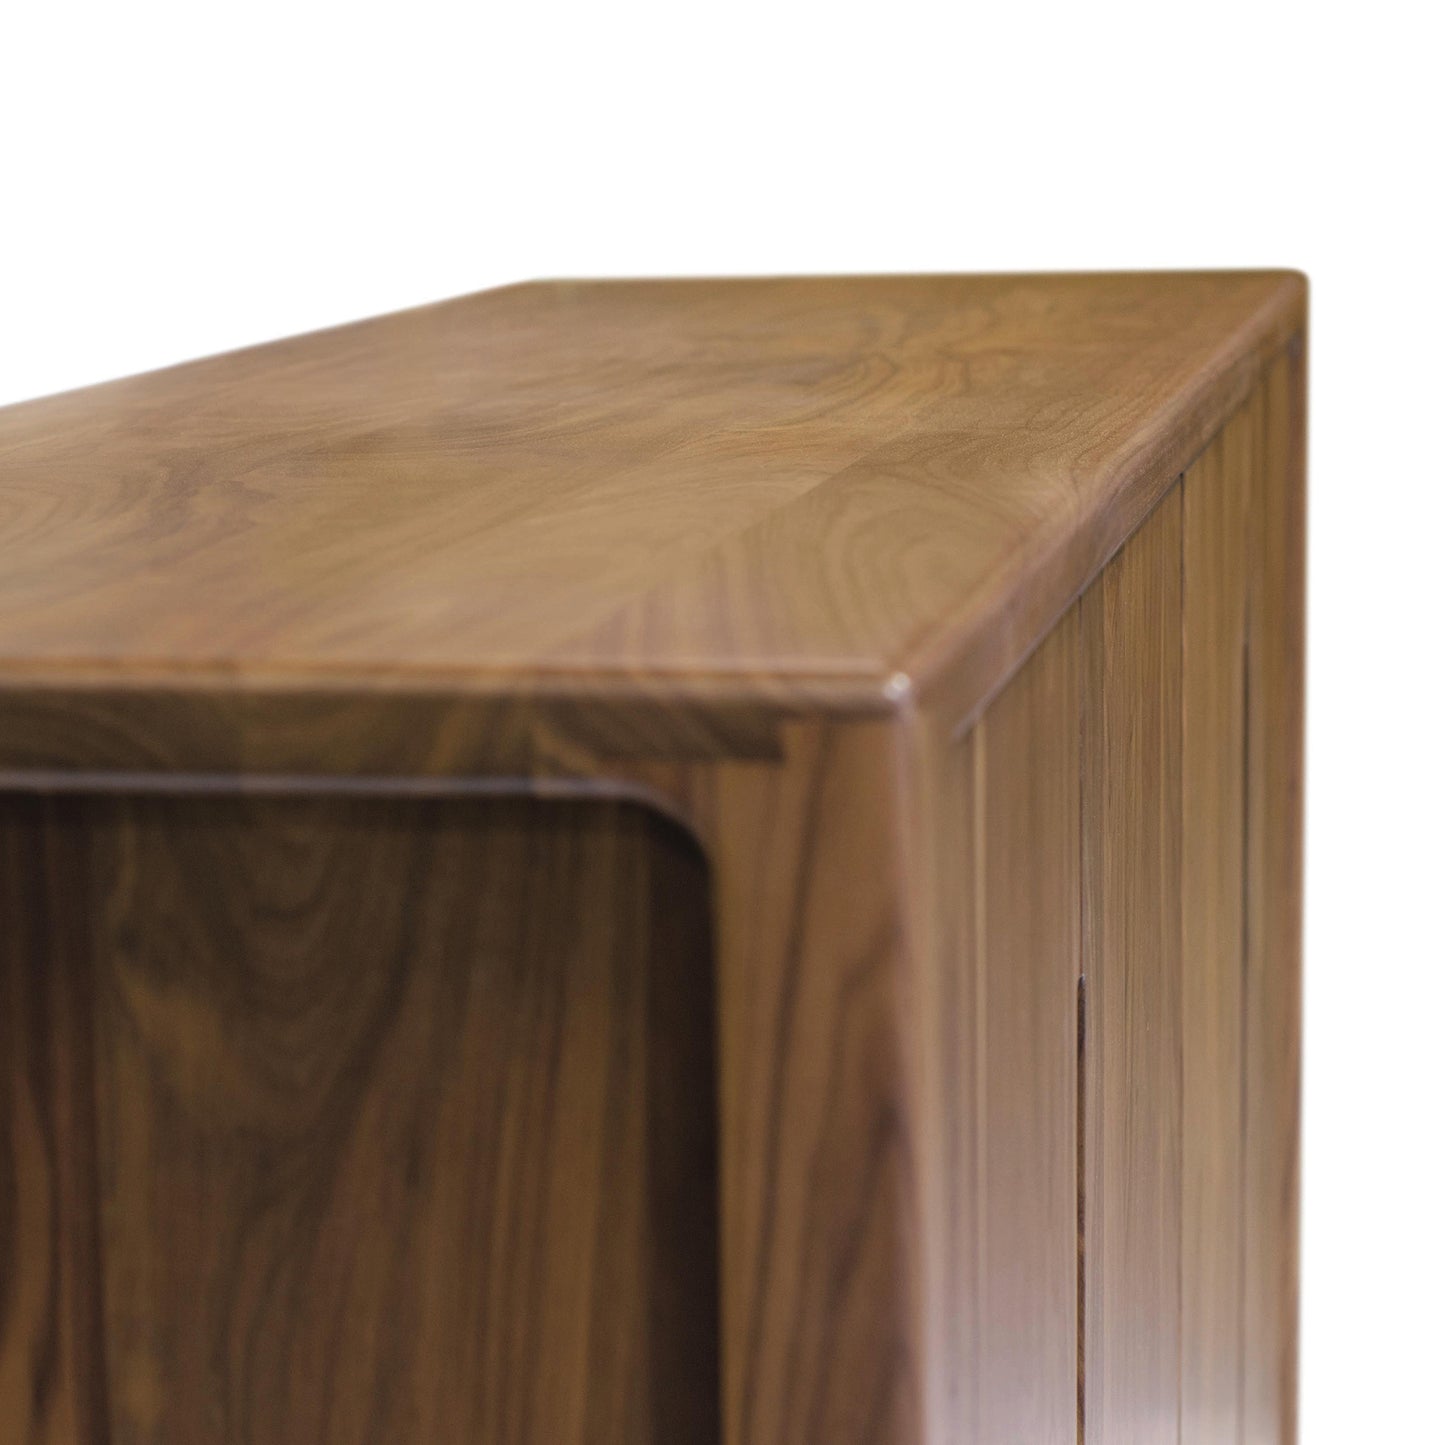 A close-up view of the corner of the Lisse Buffet by Copeland Furniture, showcasing the wood grain details and smooth finish.